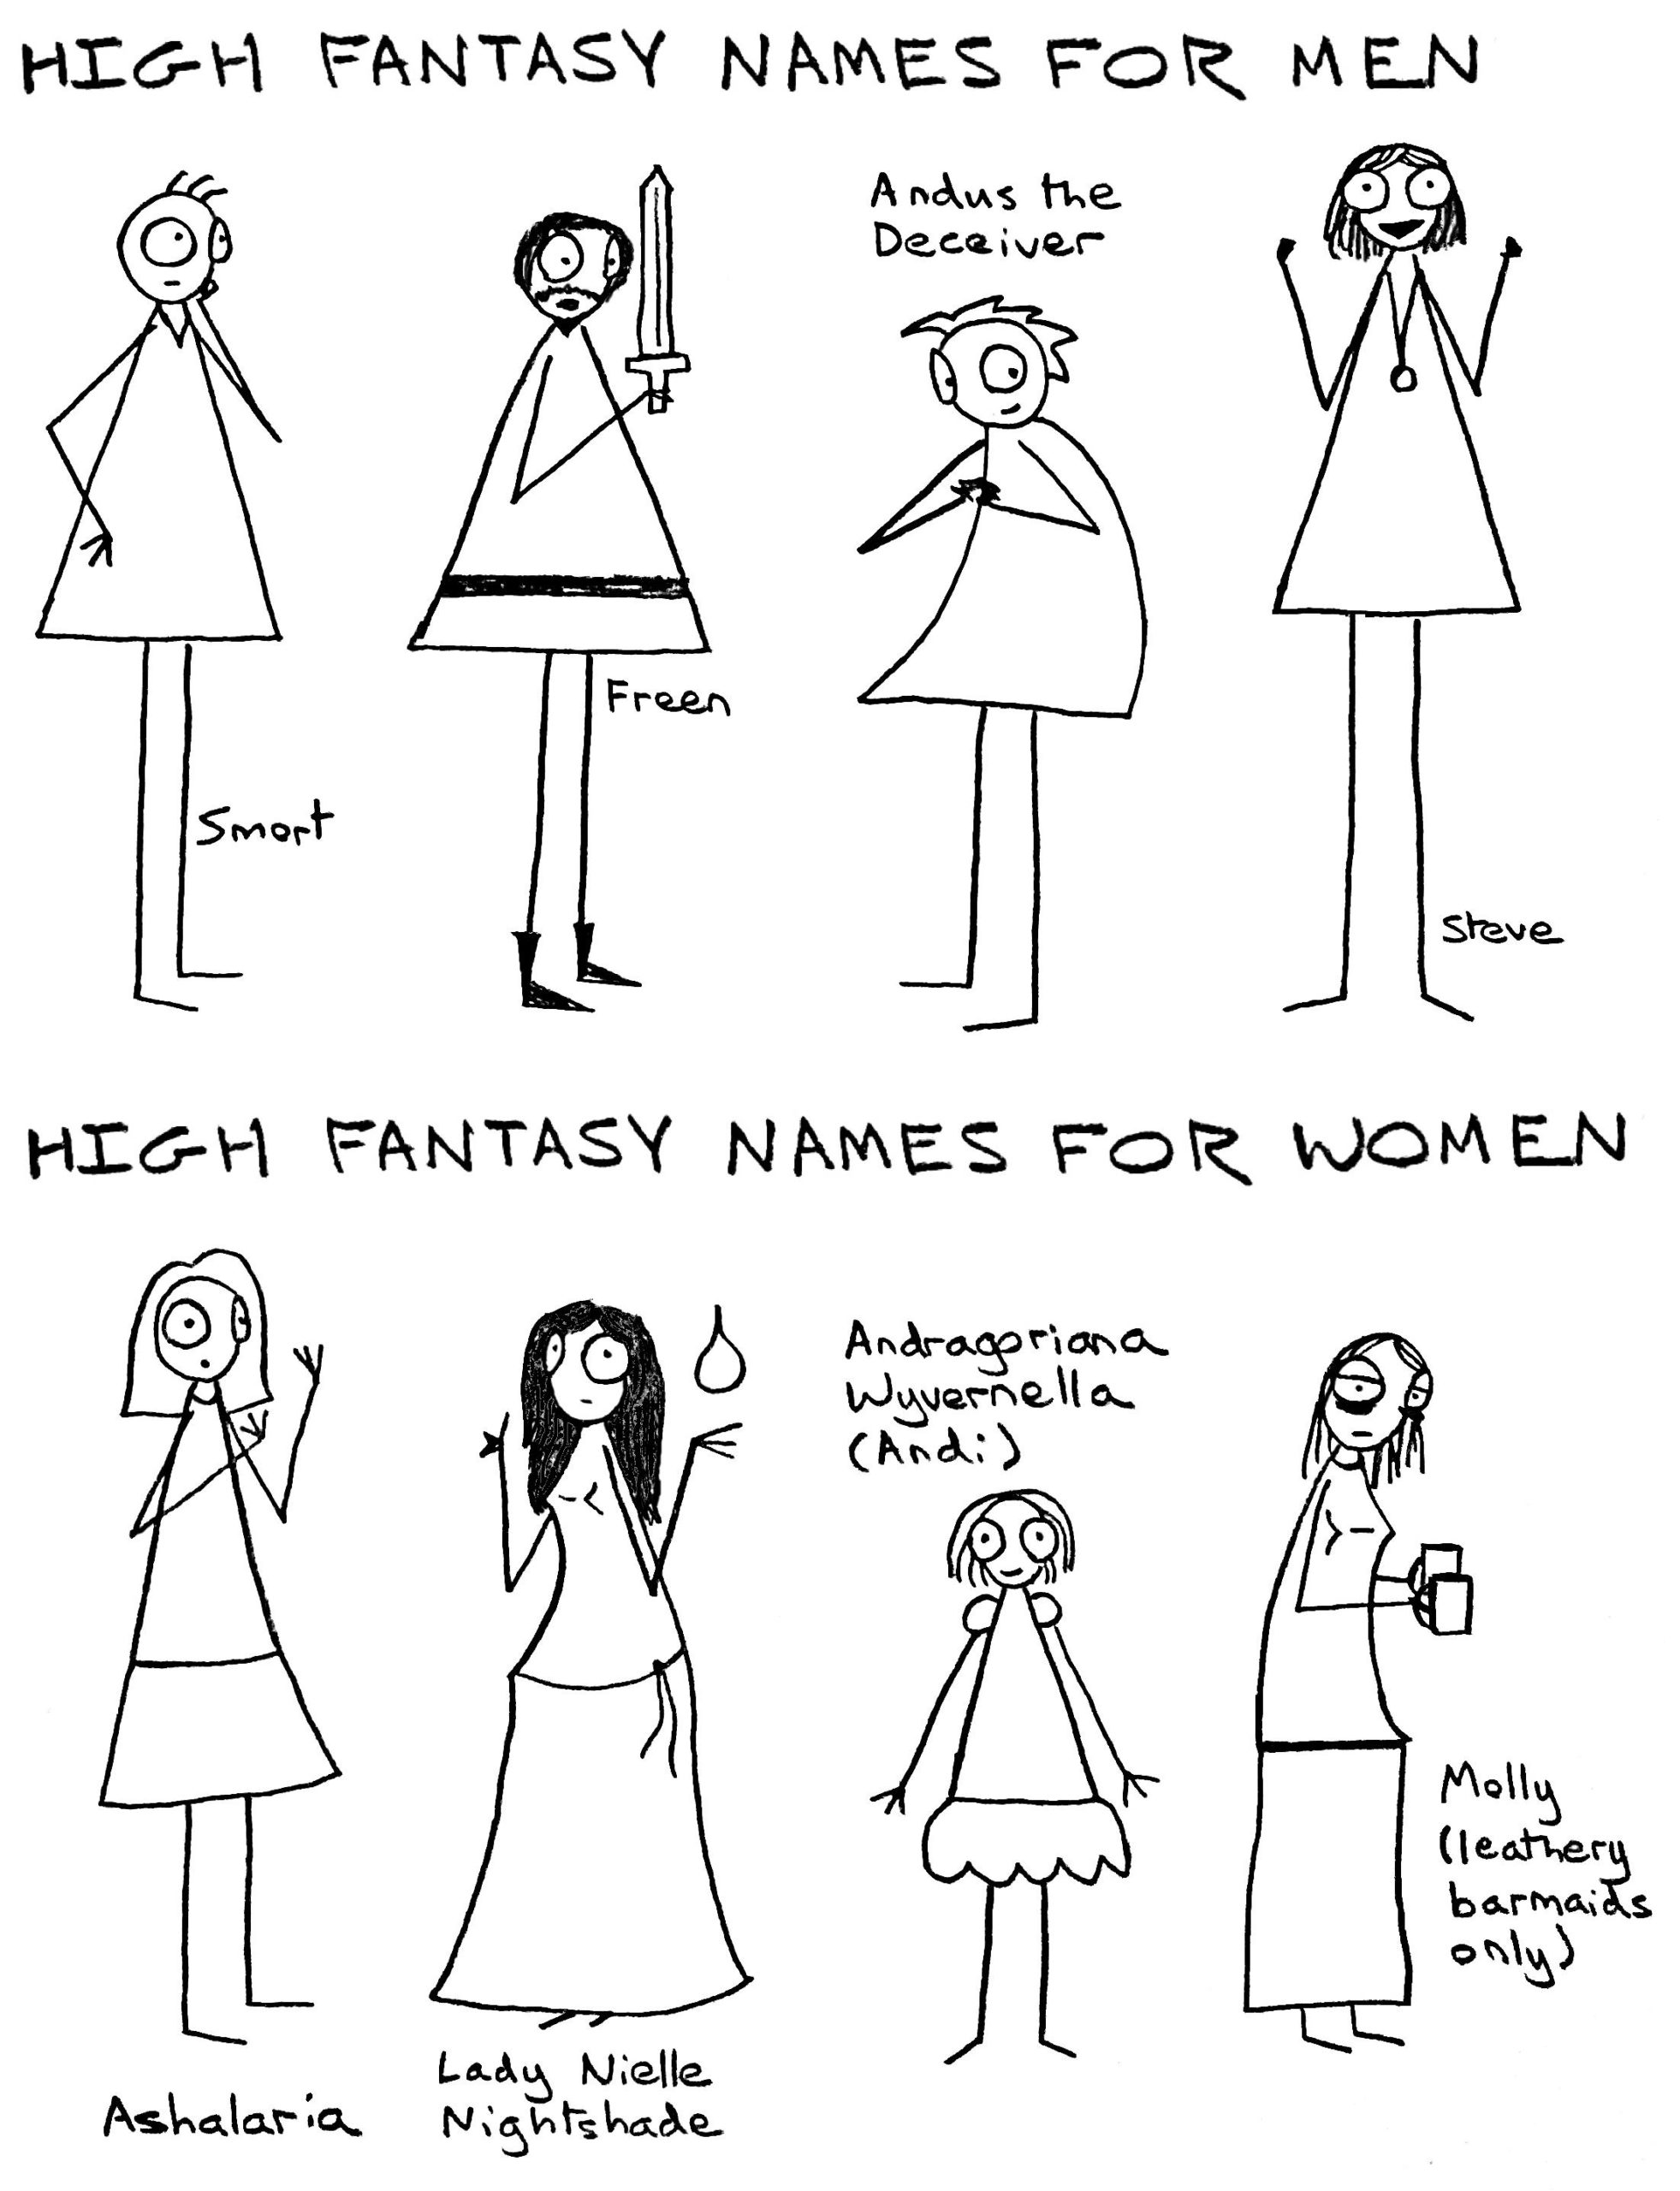 high fantasy authors give a woman a one-syllable name challenge